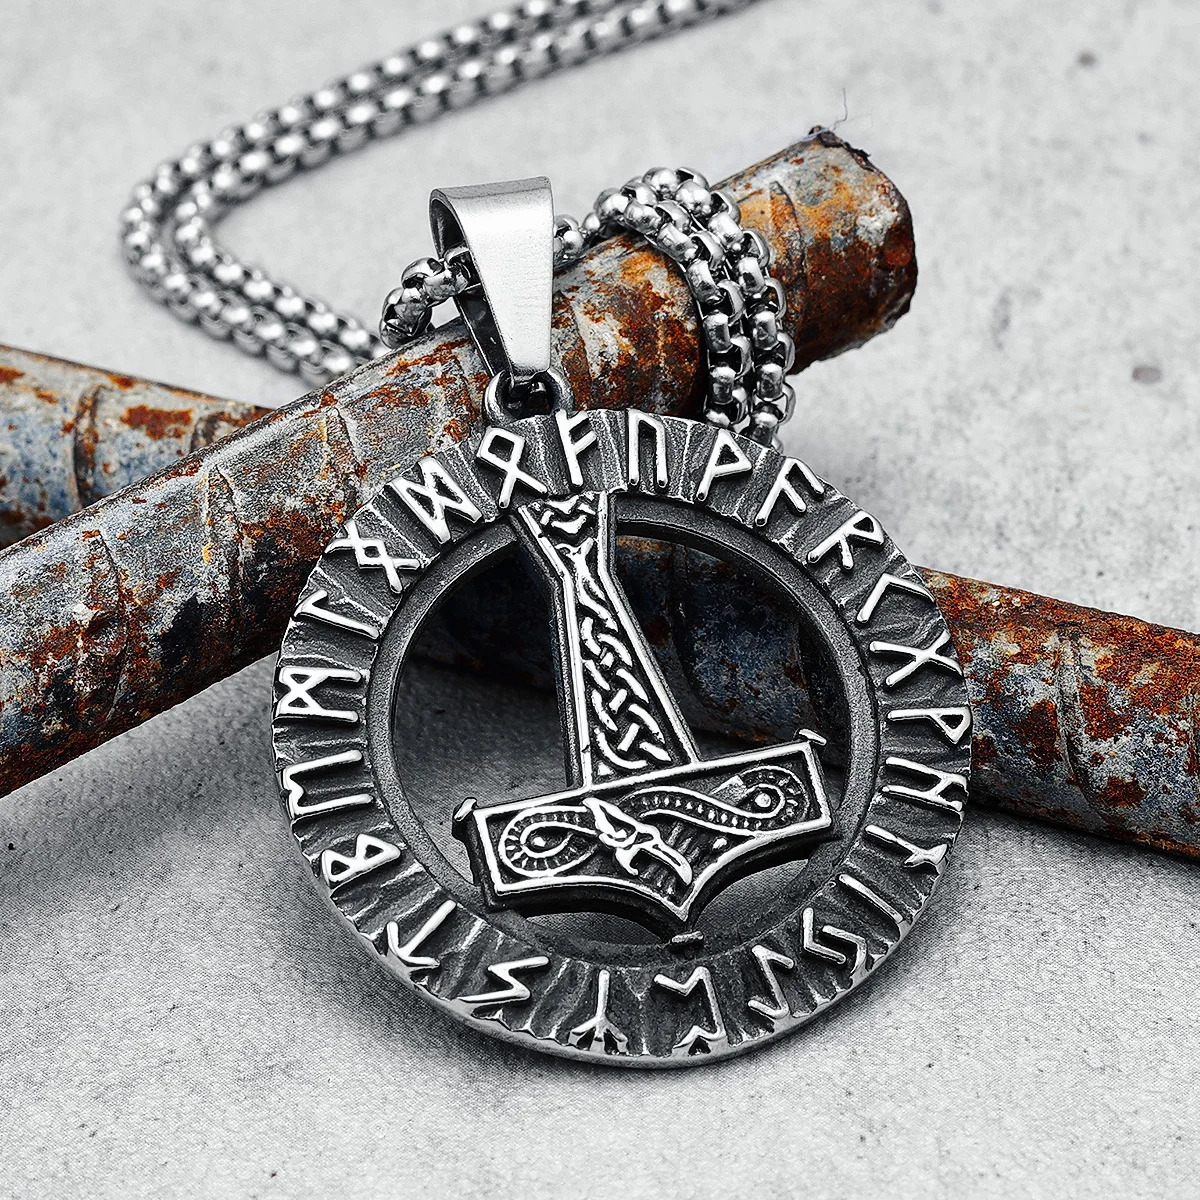 

Viking Runes Men Necklaces 316L Stainless Steel Retro Thor's Hammer Pendant Chain Punk Rock for Boyfriend Male Jewelry Best Gift